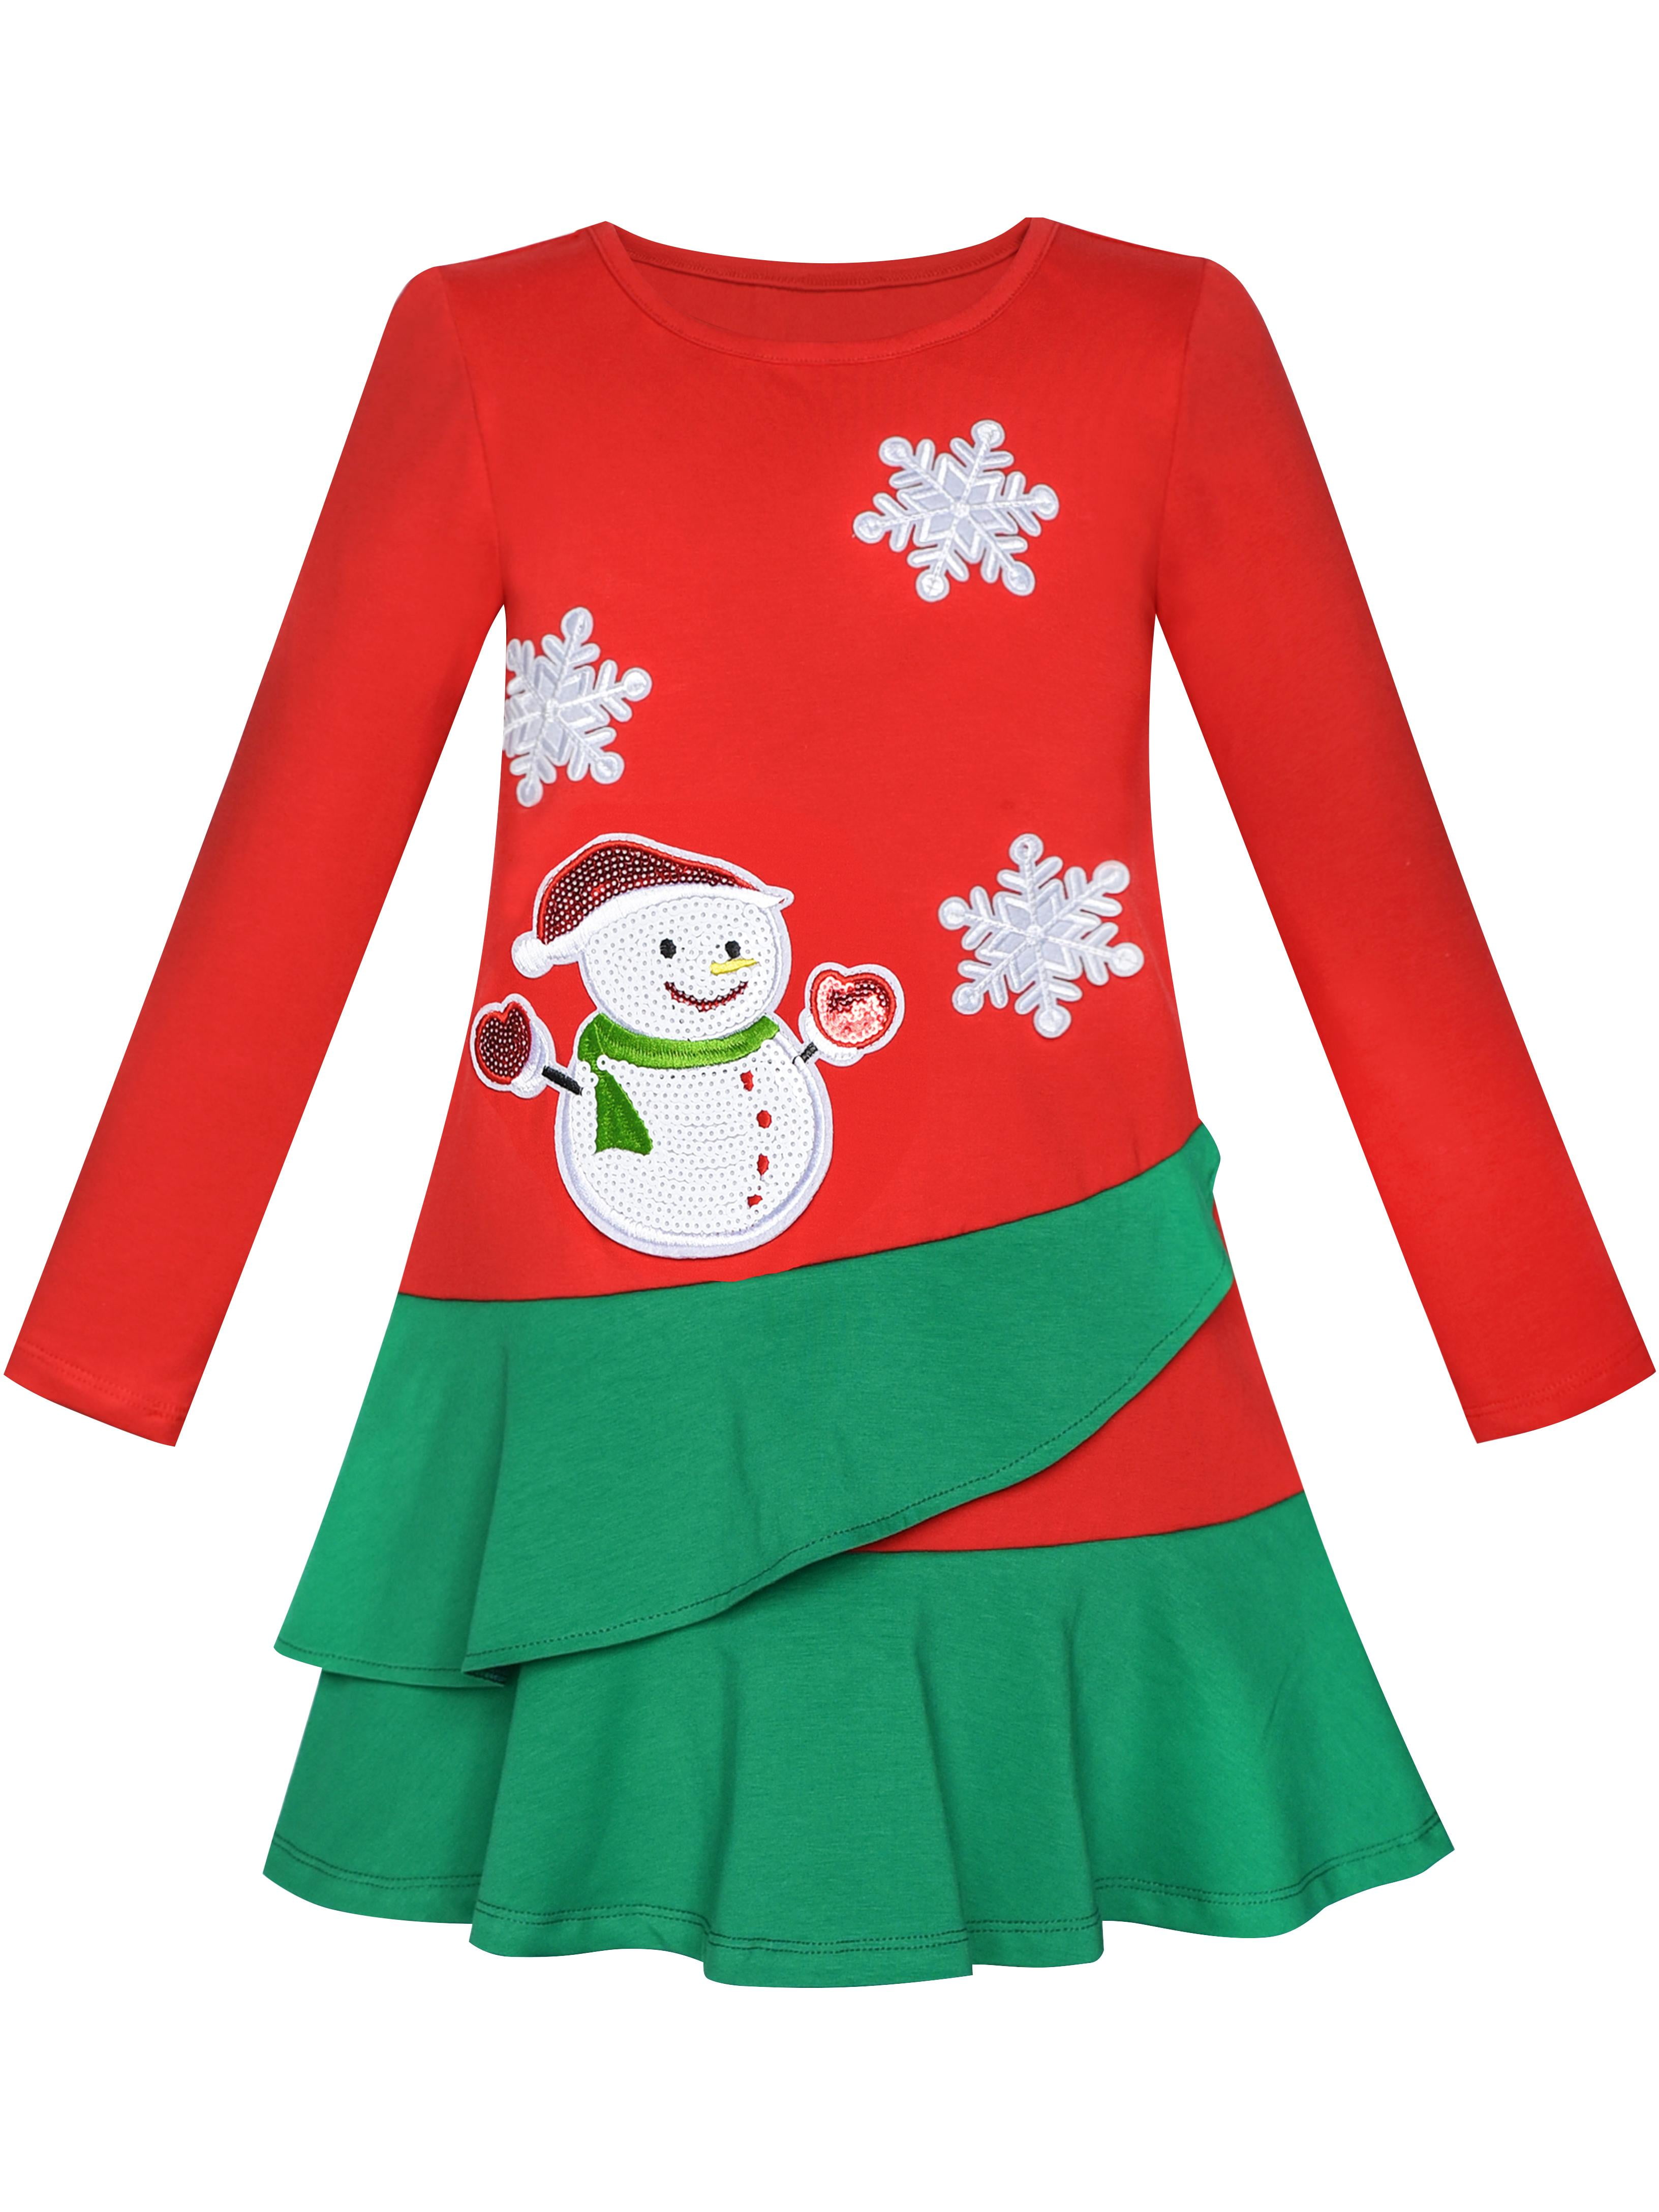 Sunny Fashion Girls Dress Long Sleeve Christmas Snowman Holiday Party Size 5-12